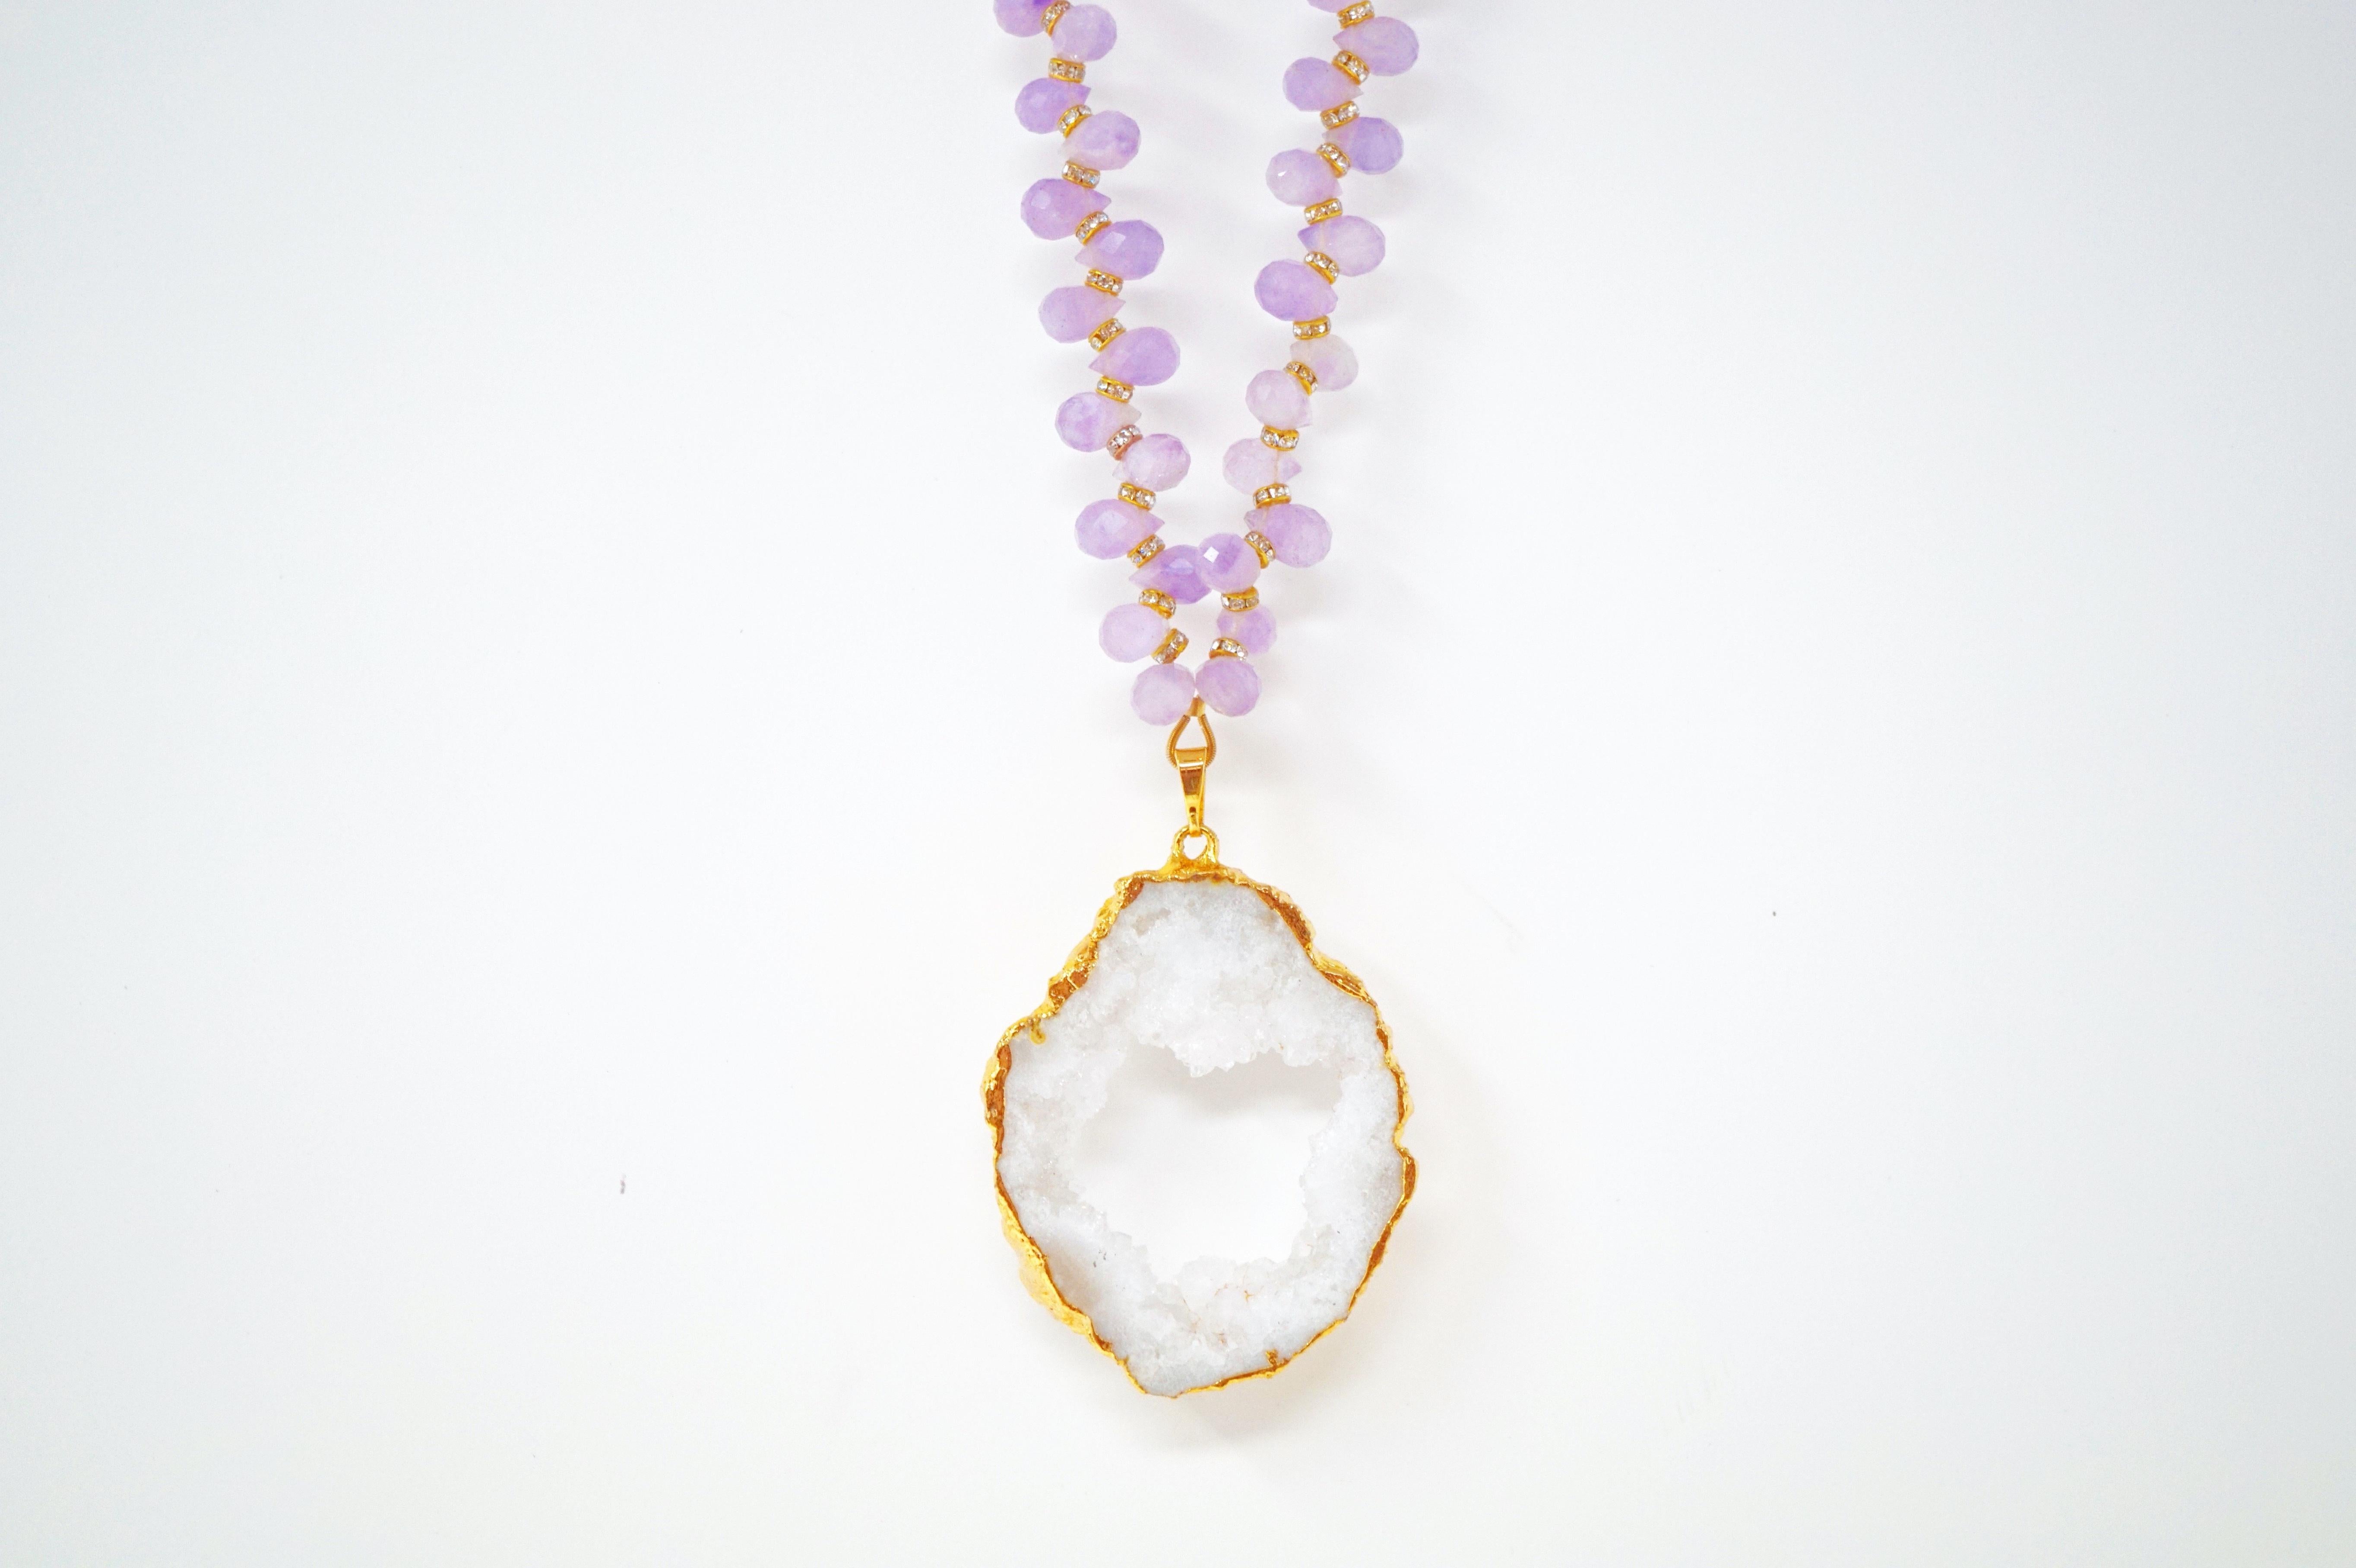 Briolette Cut Amethyst Gemstone Necklace with Swarovski Accents and Gilded Druzy Geode Pendant For Sale